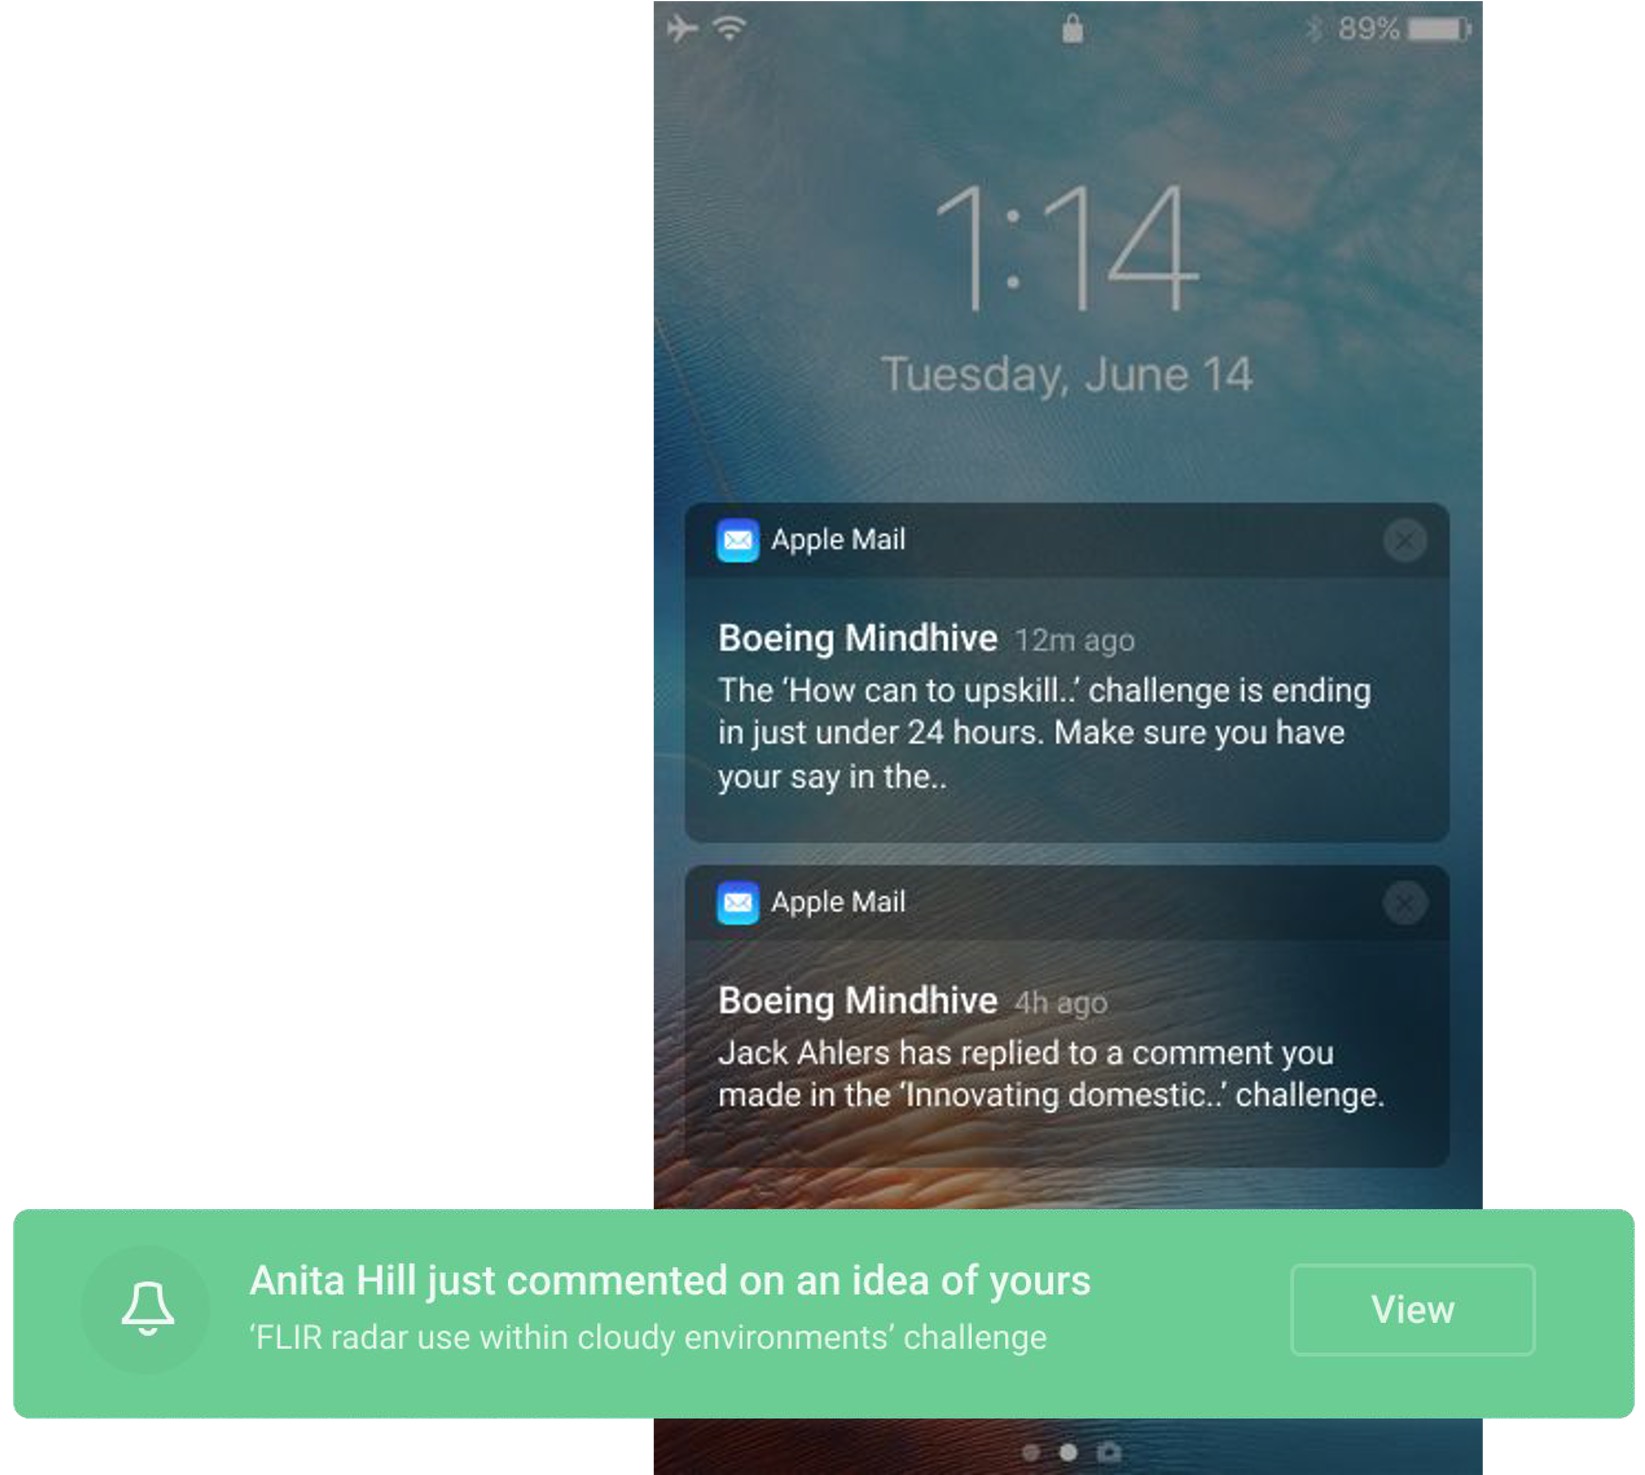 Notifications build activity and engagement